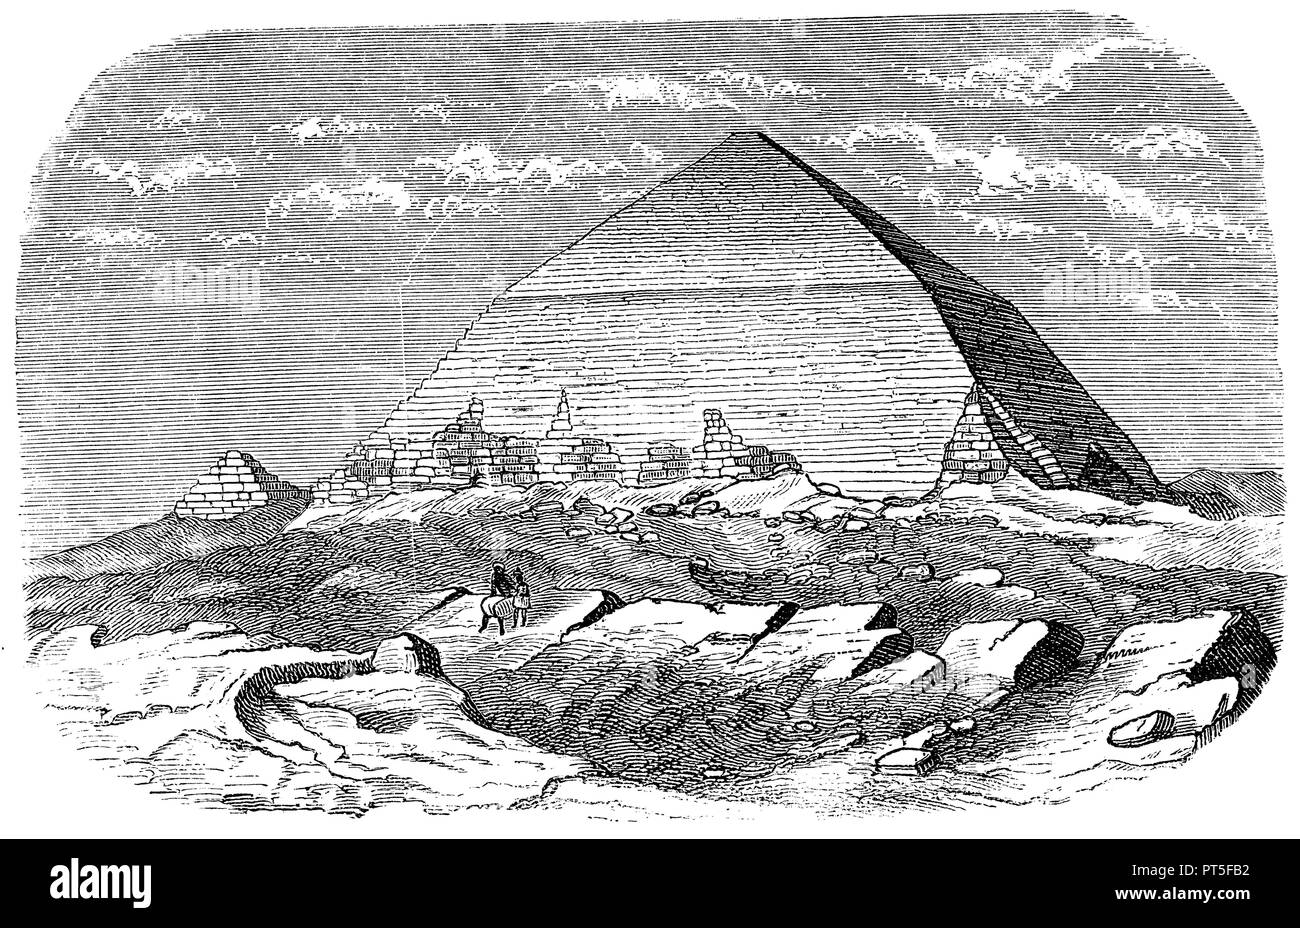 Pyramid of Daschur (to Vyse and Perring), anonym  1870 Stock Photo